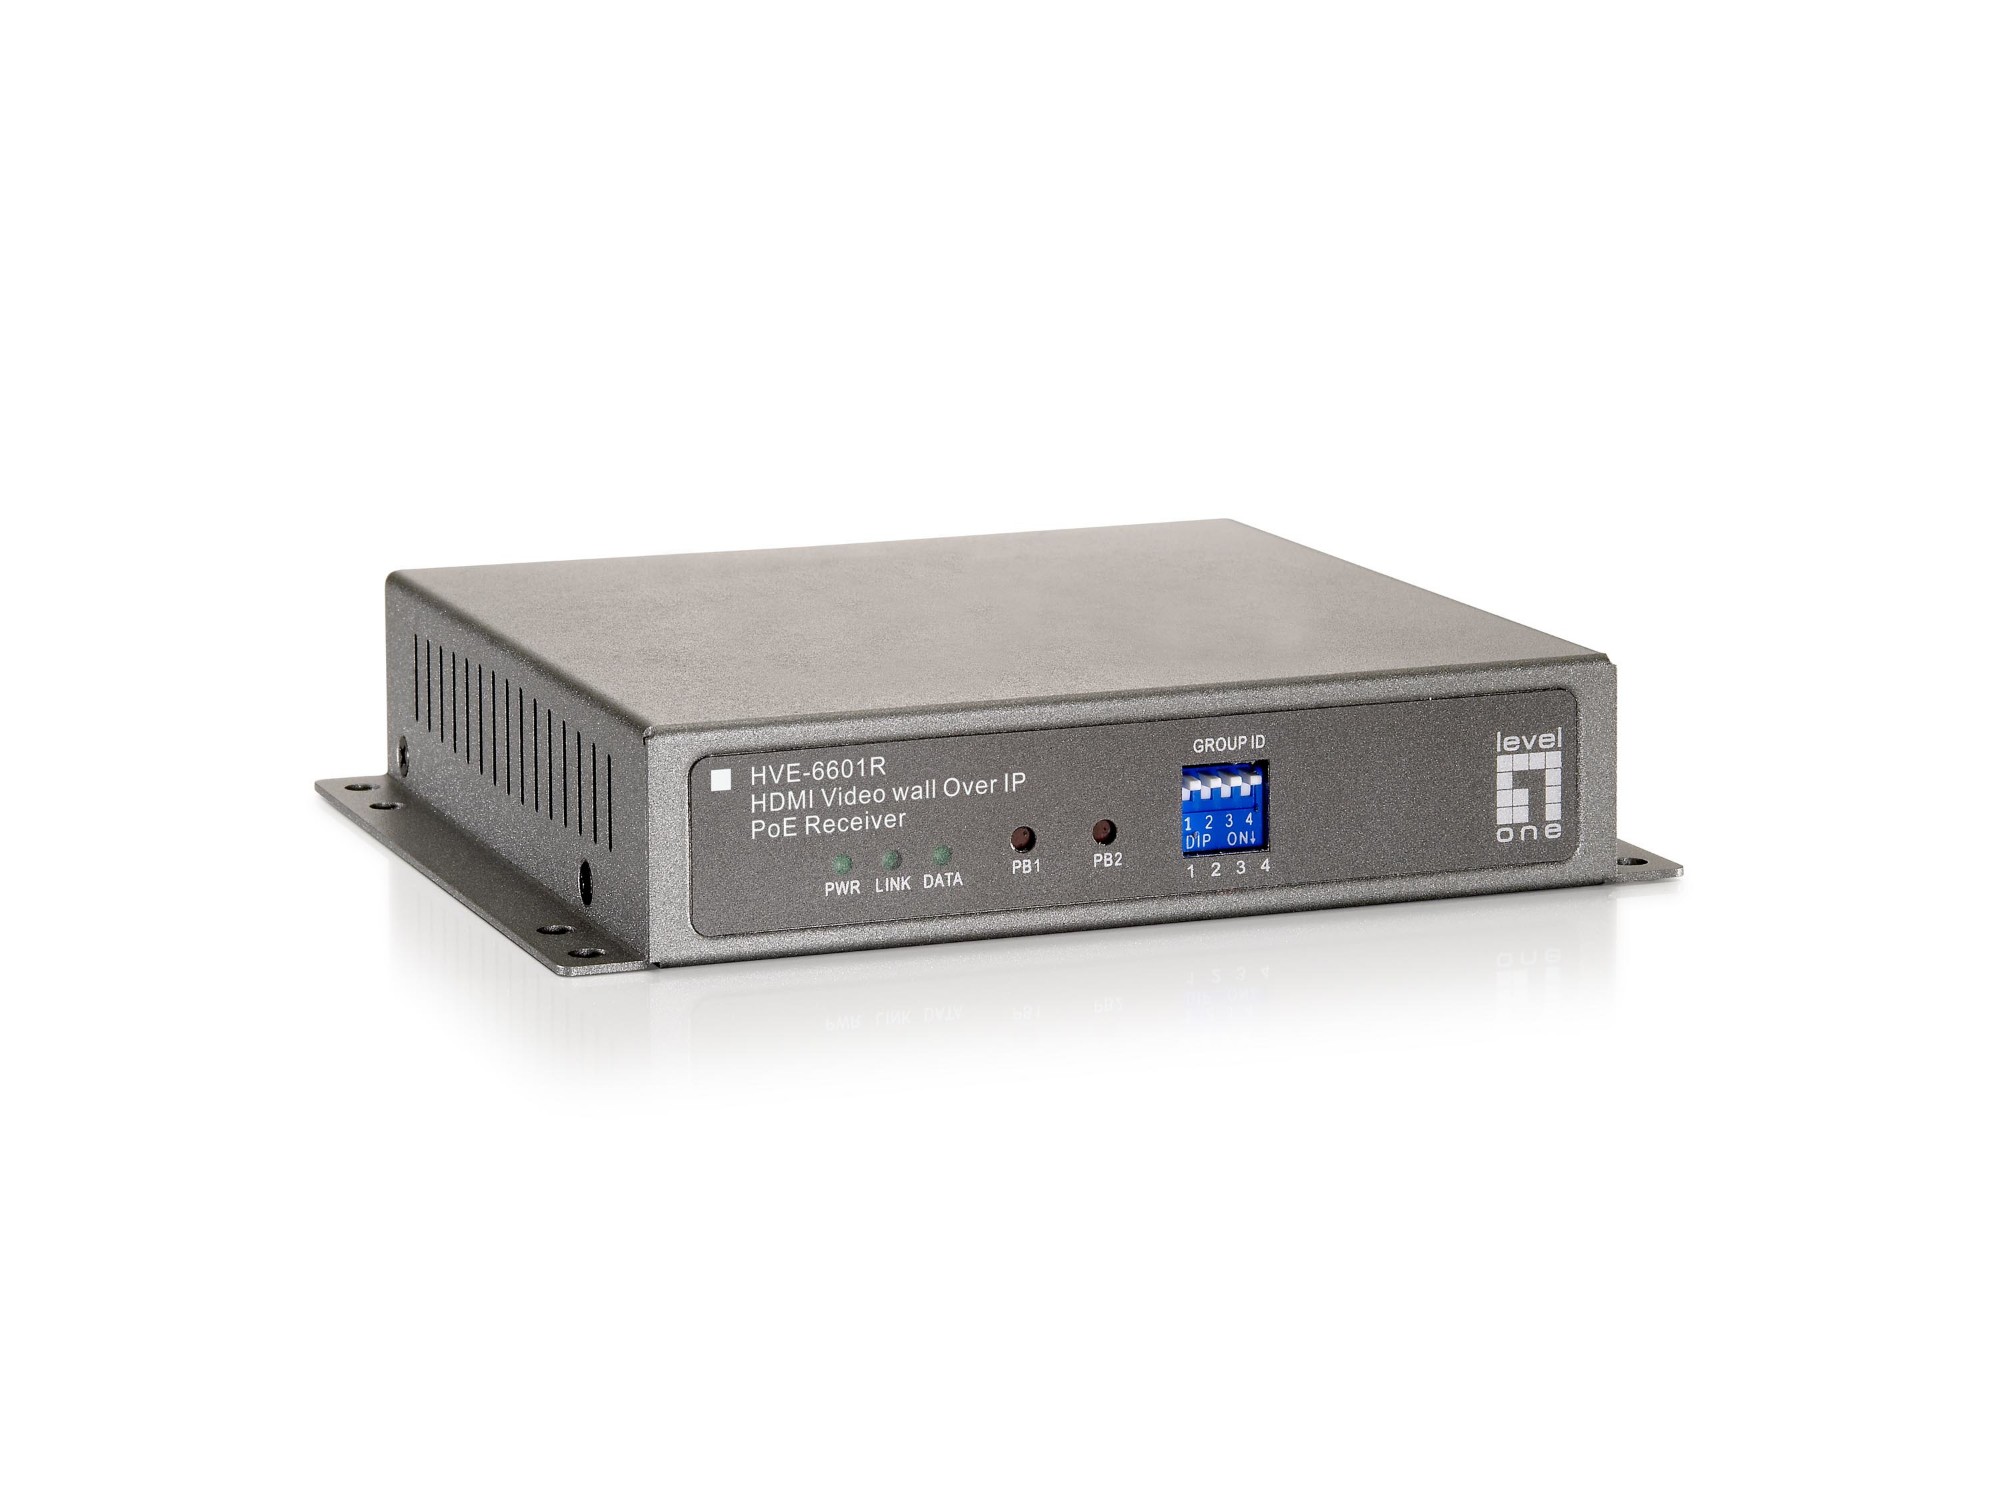 LevelOne HDMI Video Wall over IP PoE Receiver